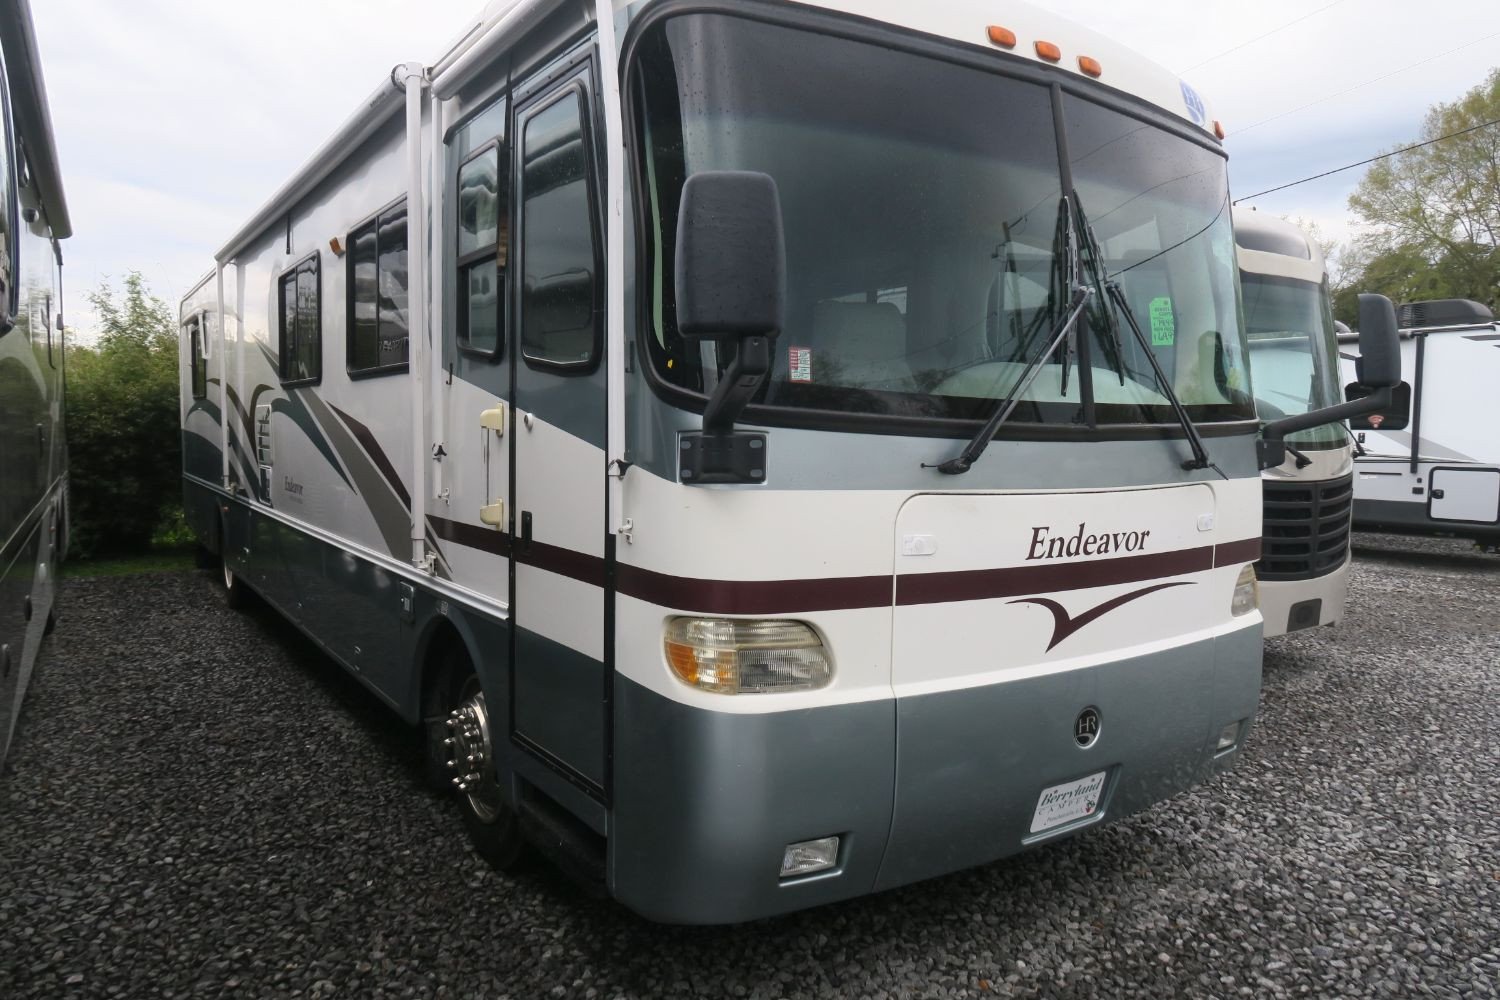 USED 2000 HOLIDAY RAMBLER ENDEAVOR 40PBD - Overview | Berryland Campers 2000 Holiday Rambler Endeavor For Sale